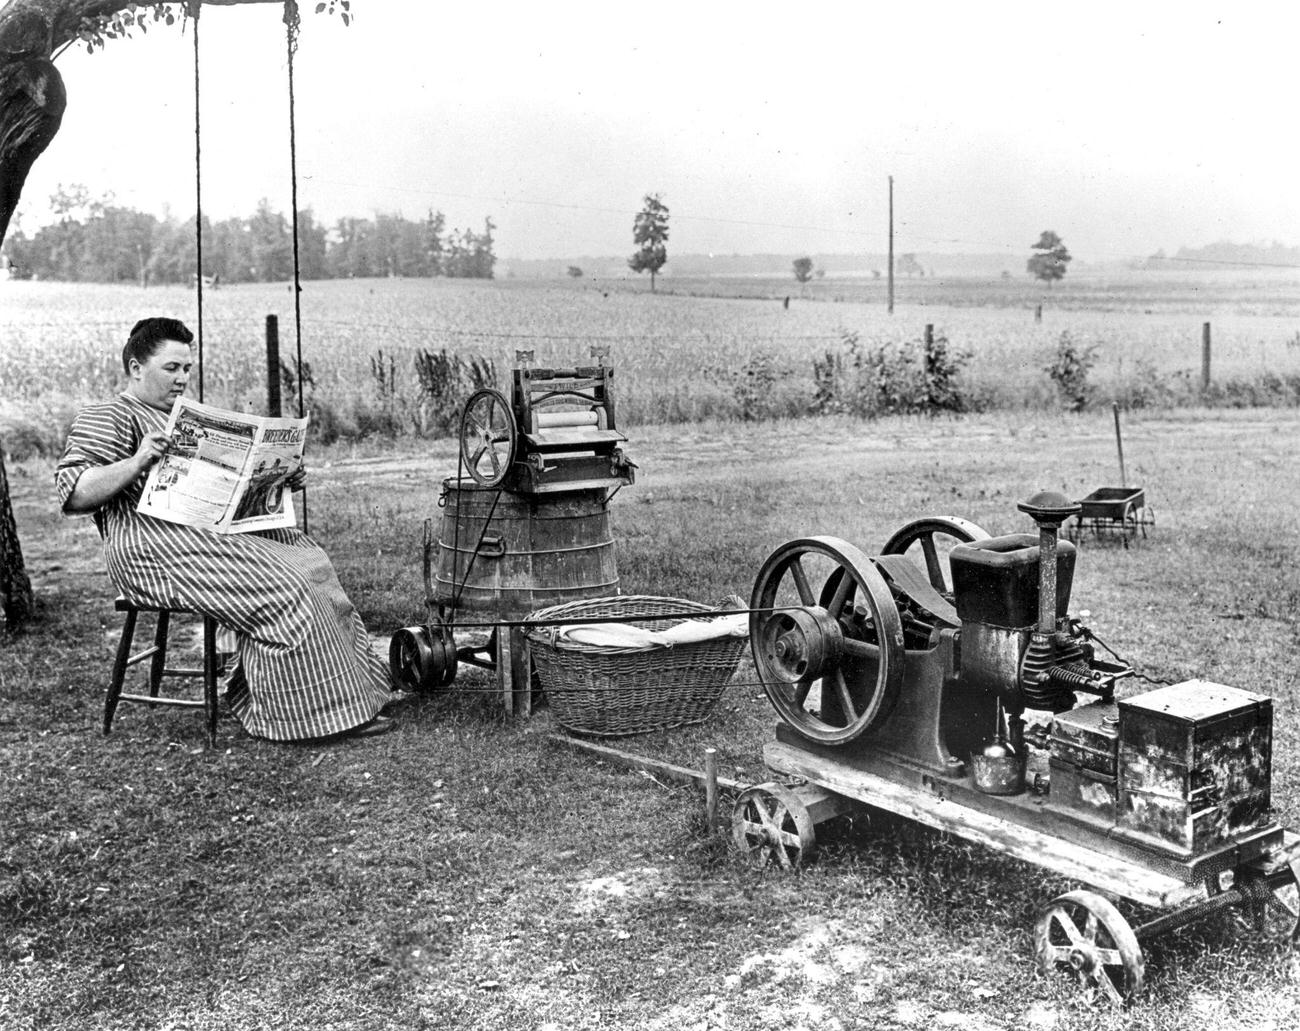 Woman reading beside a gas-powered washing machine, Midwest, 1914.